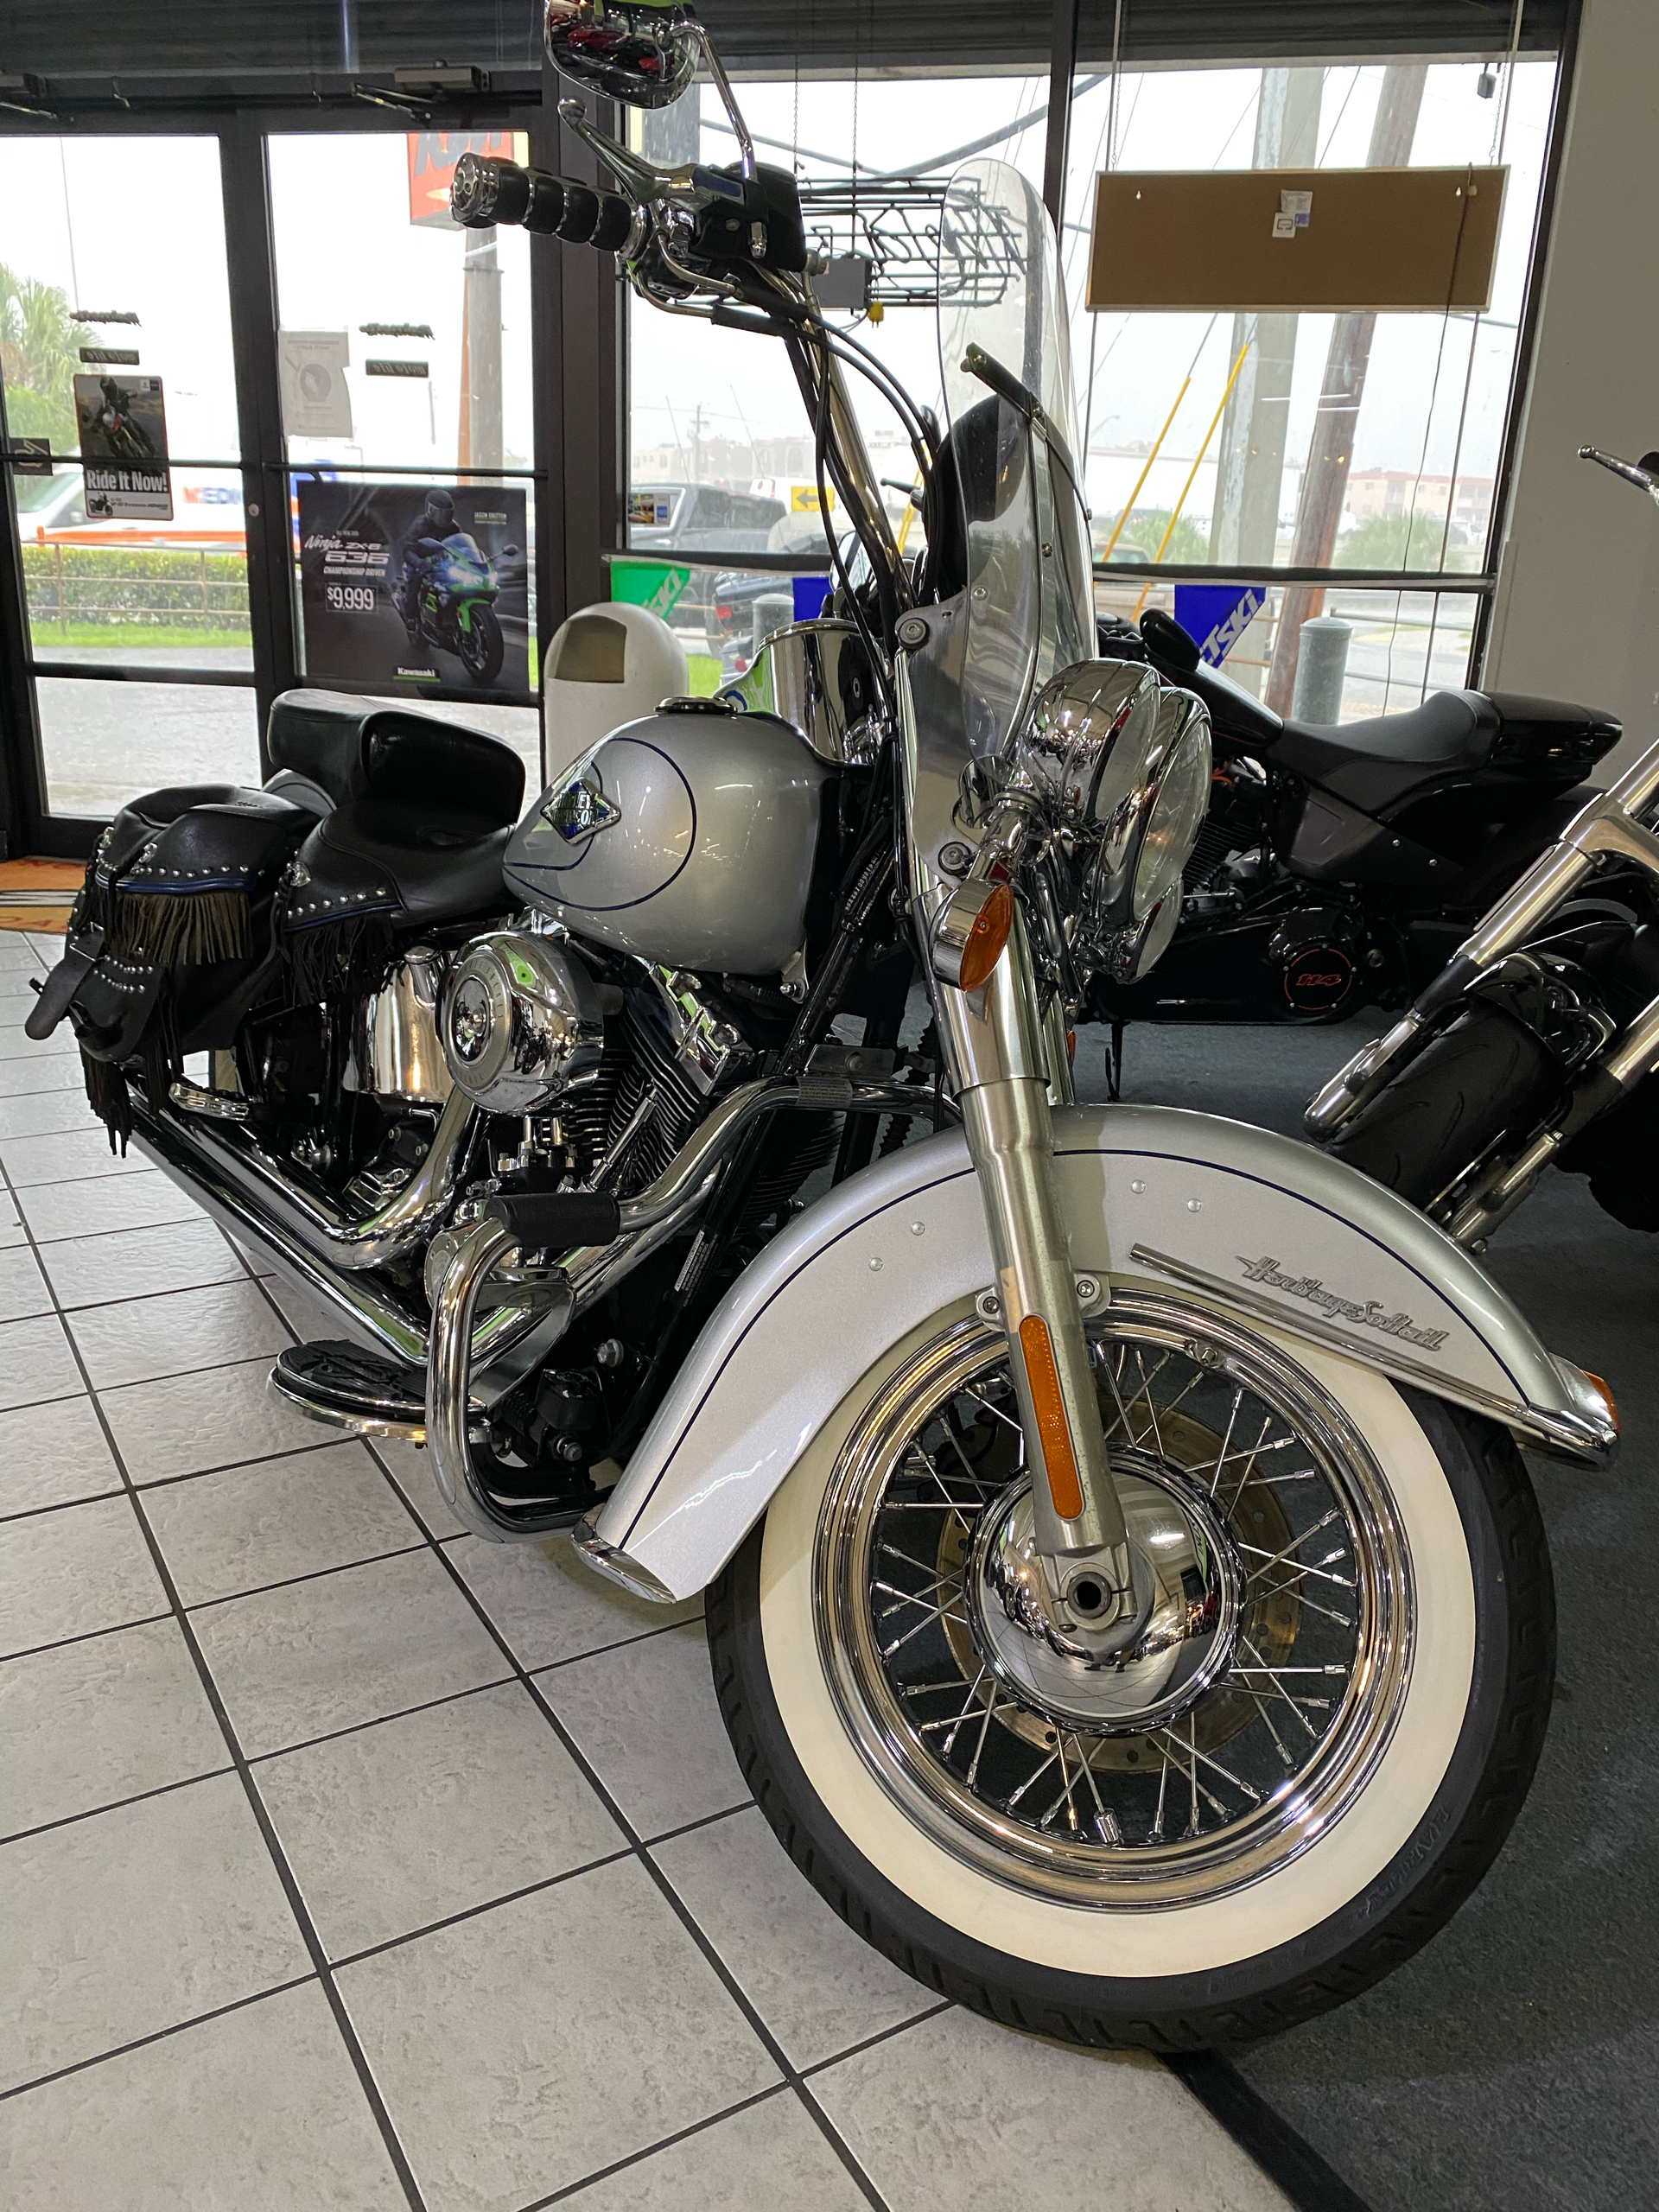 Used 2010 Harley Davidson Heritage Softail Classic Motorcycles In Hialeah Fl